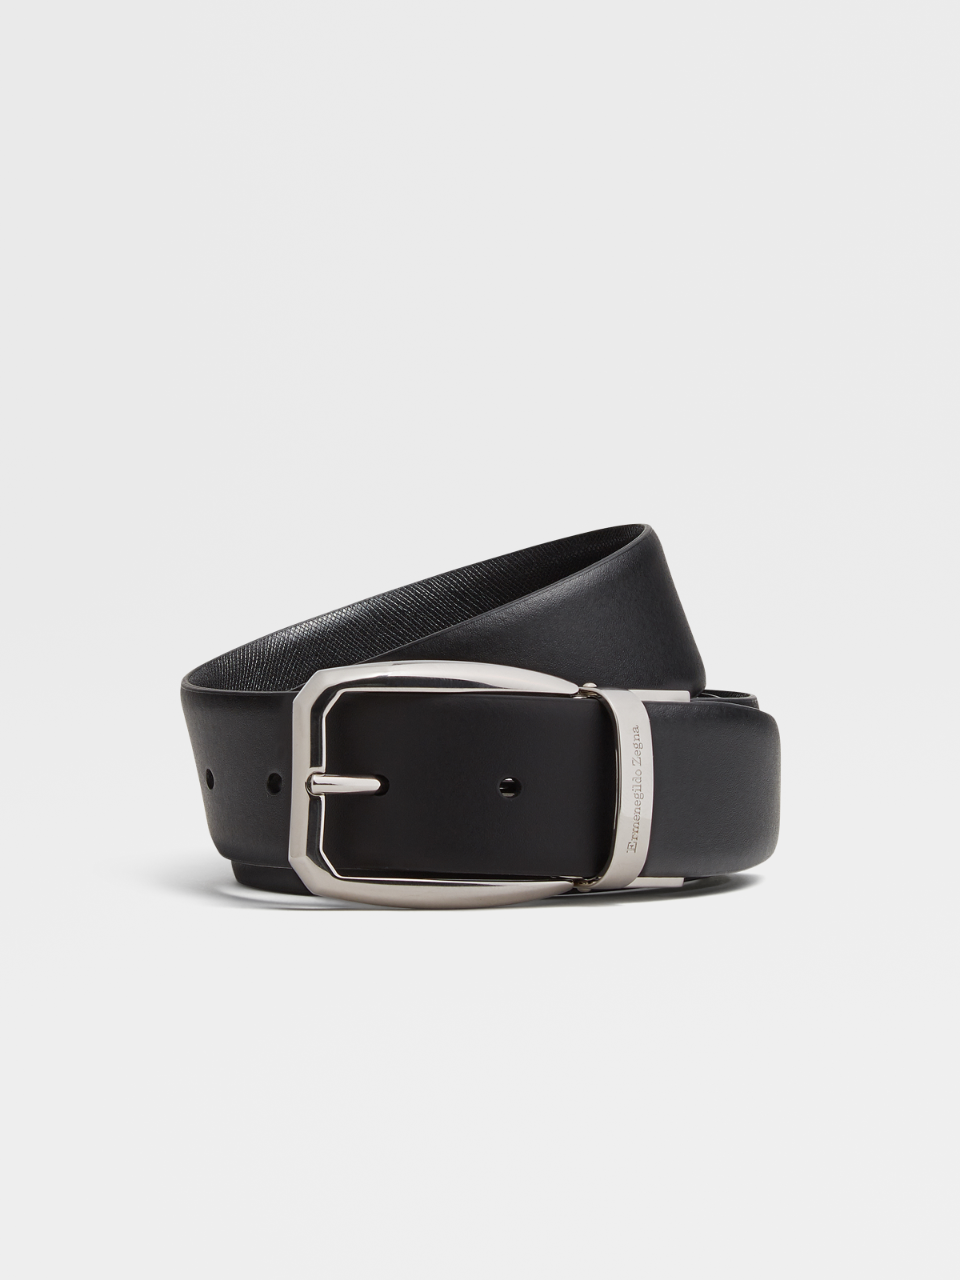 Black Smooth Leather and Black Embossed Leather Reversible Belt